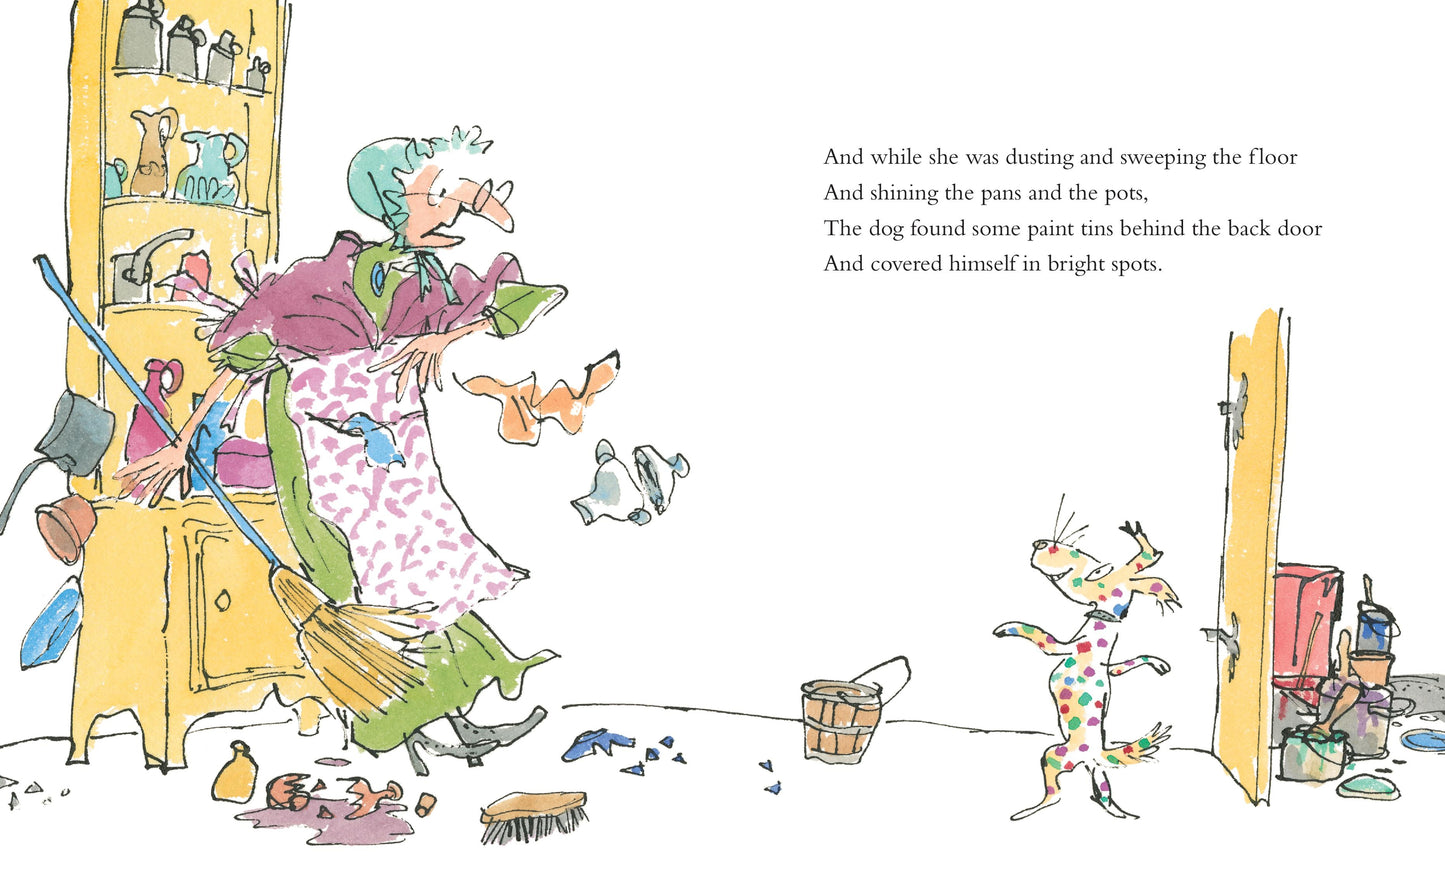 Old Mother Hubbard’s Dog Needs a Doctor by John Yeoman and Quentin Blake